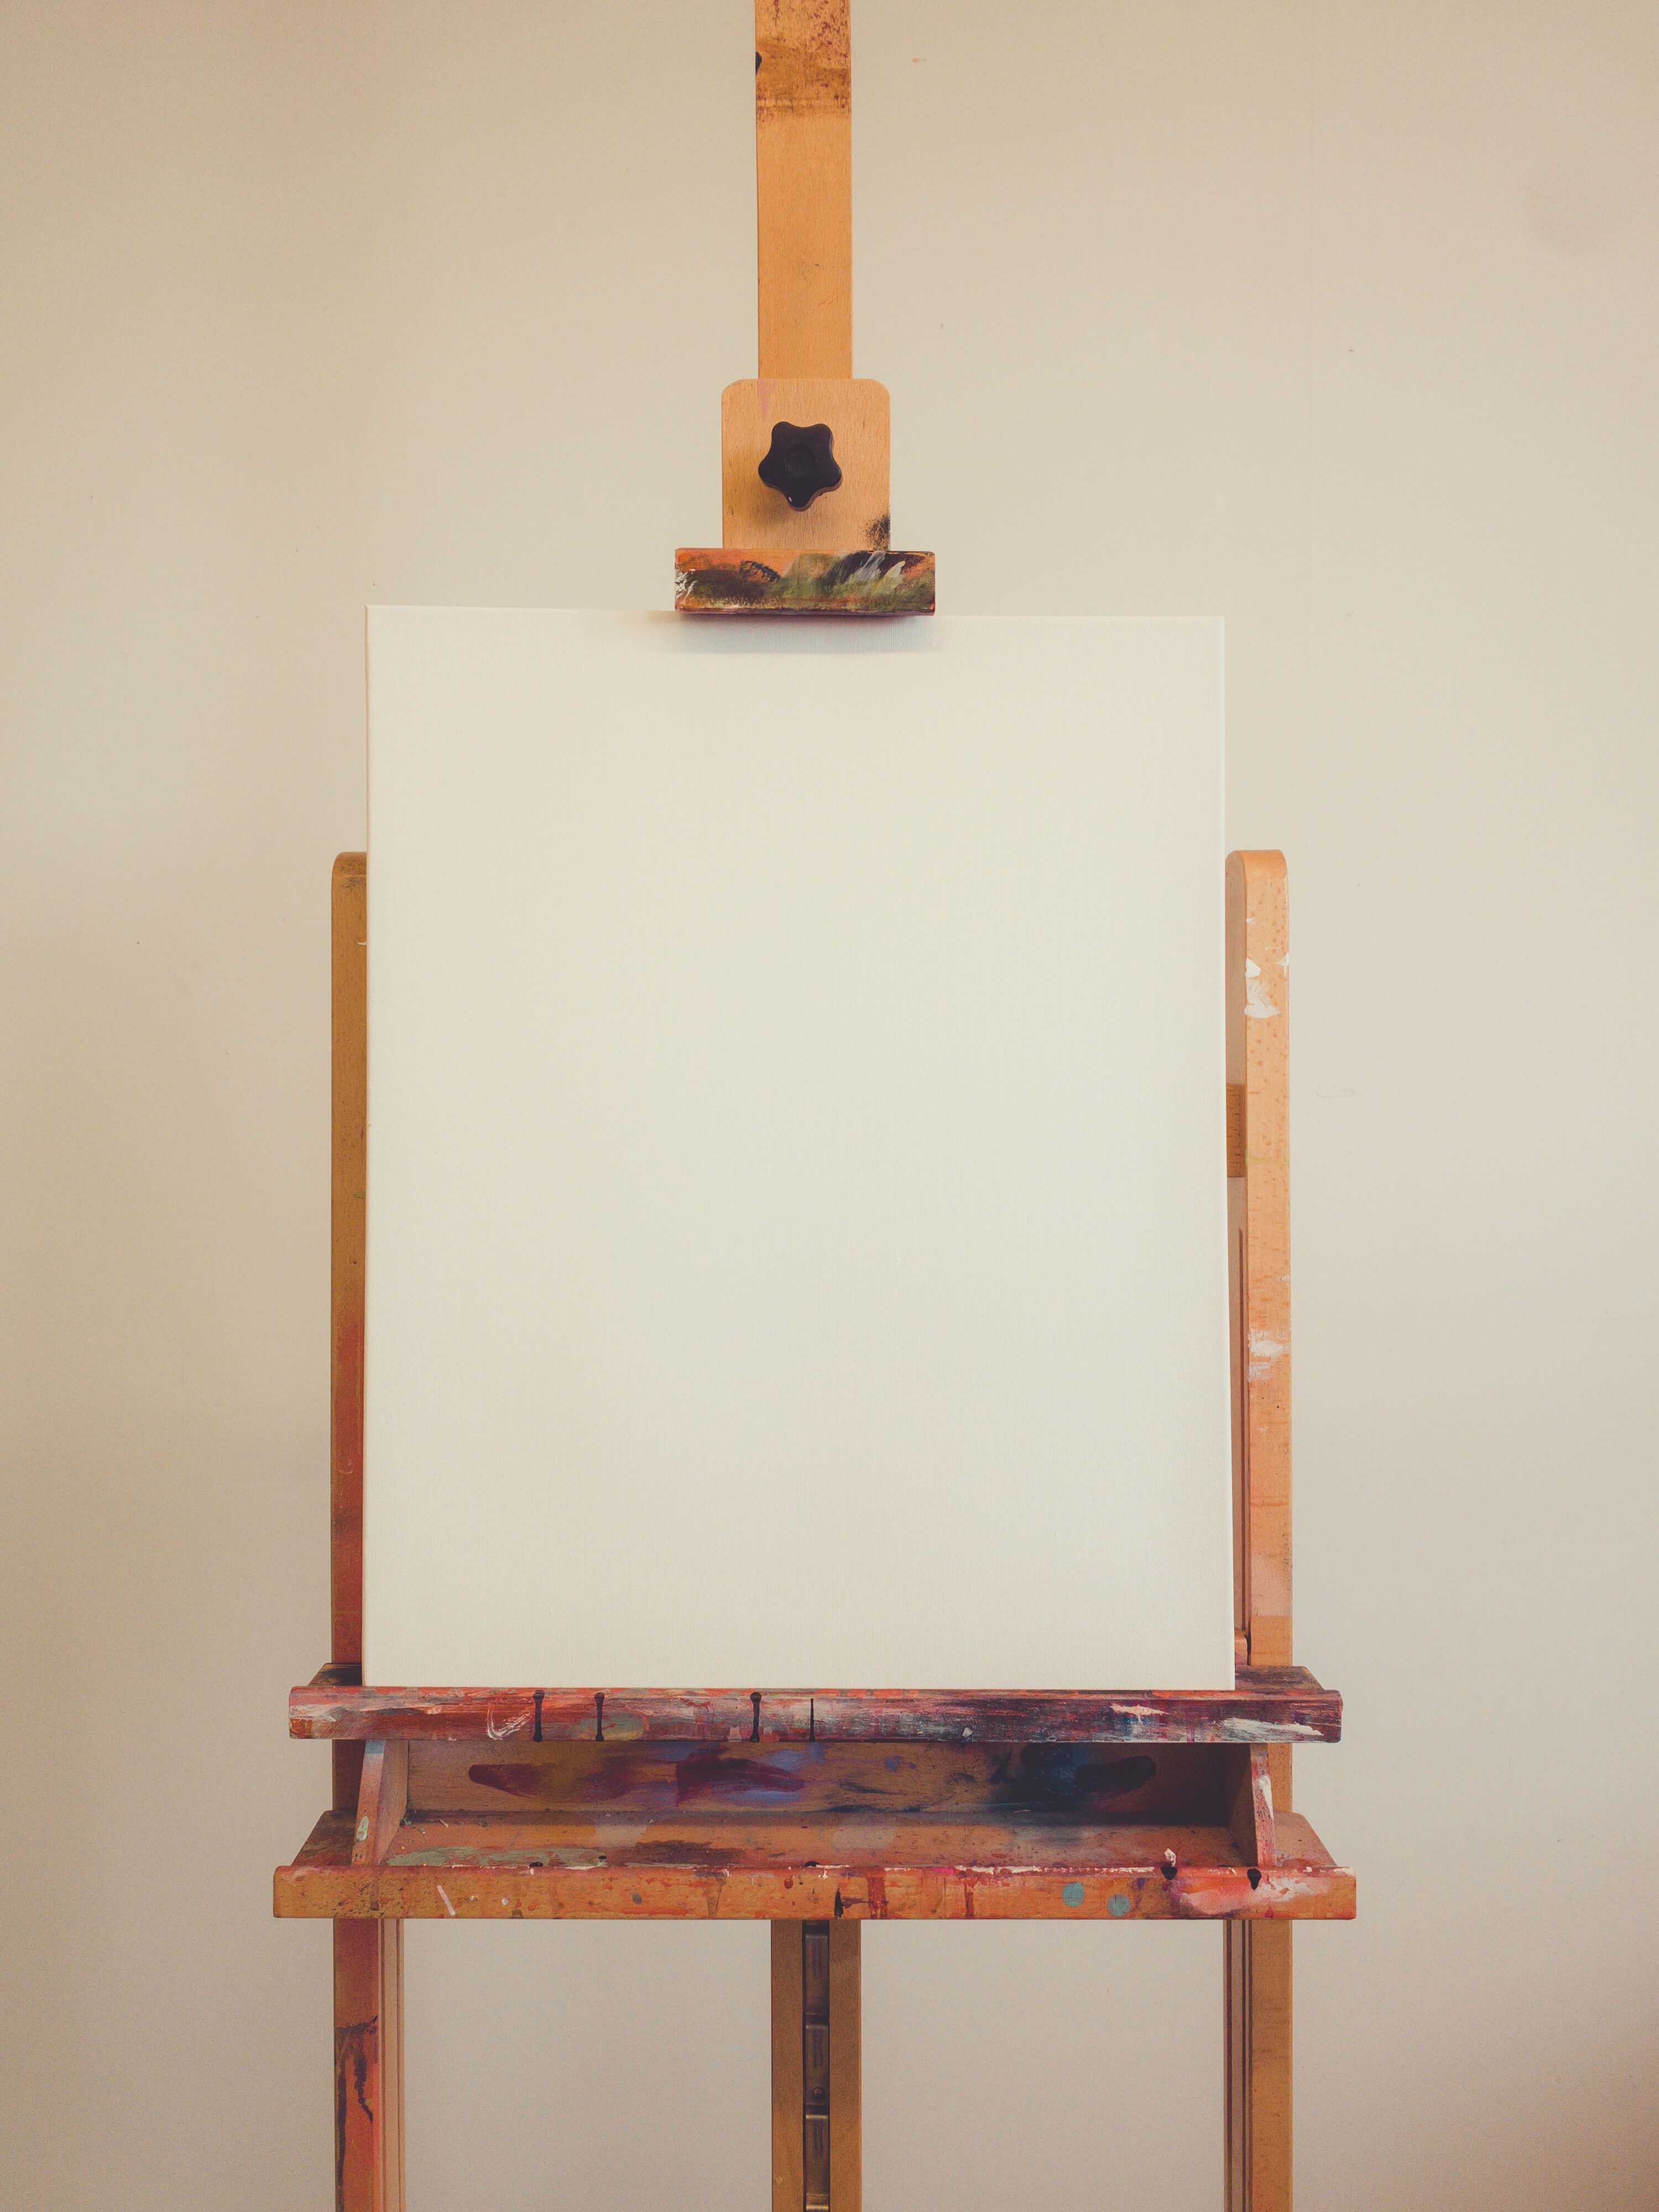 A wooden easel with a blank empty canvas sitting on it in a room with white walls.